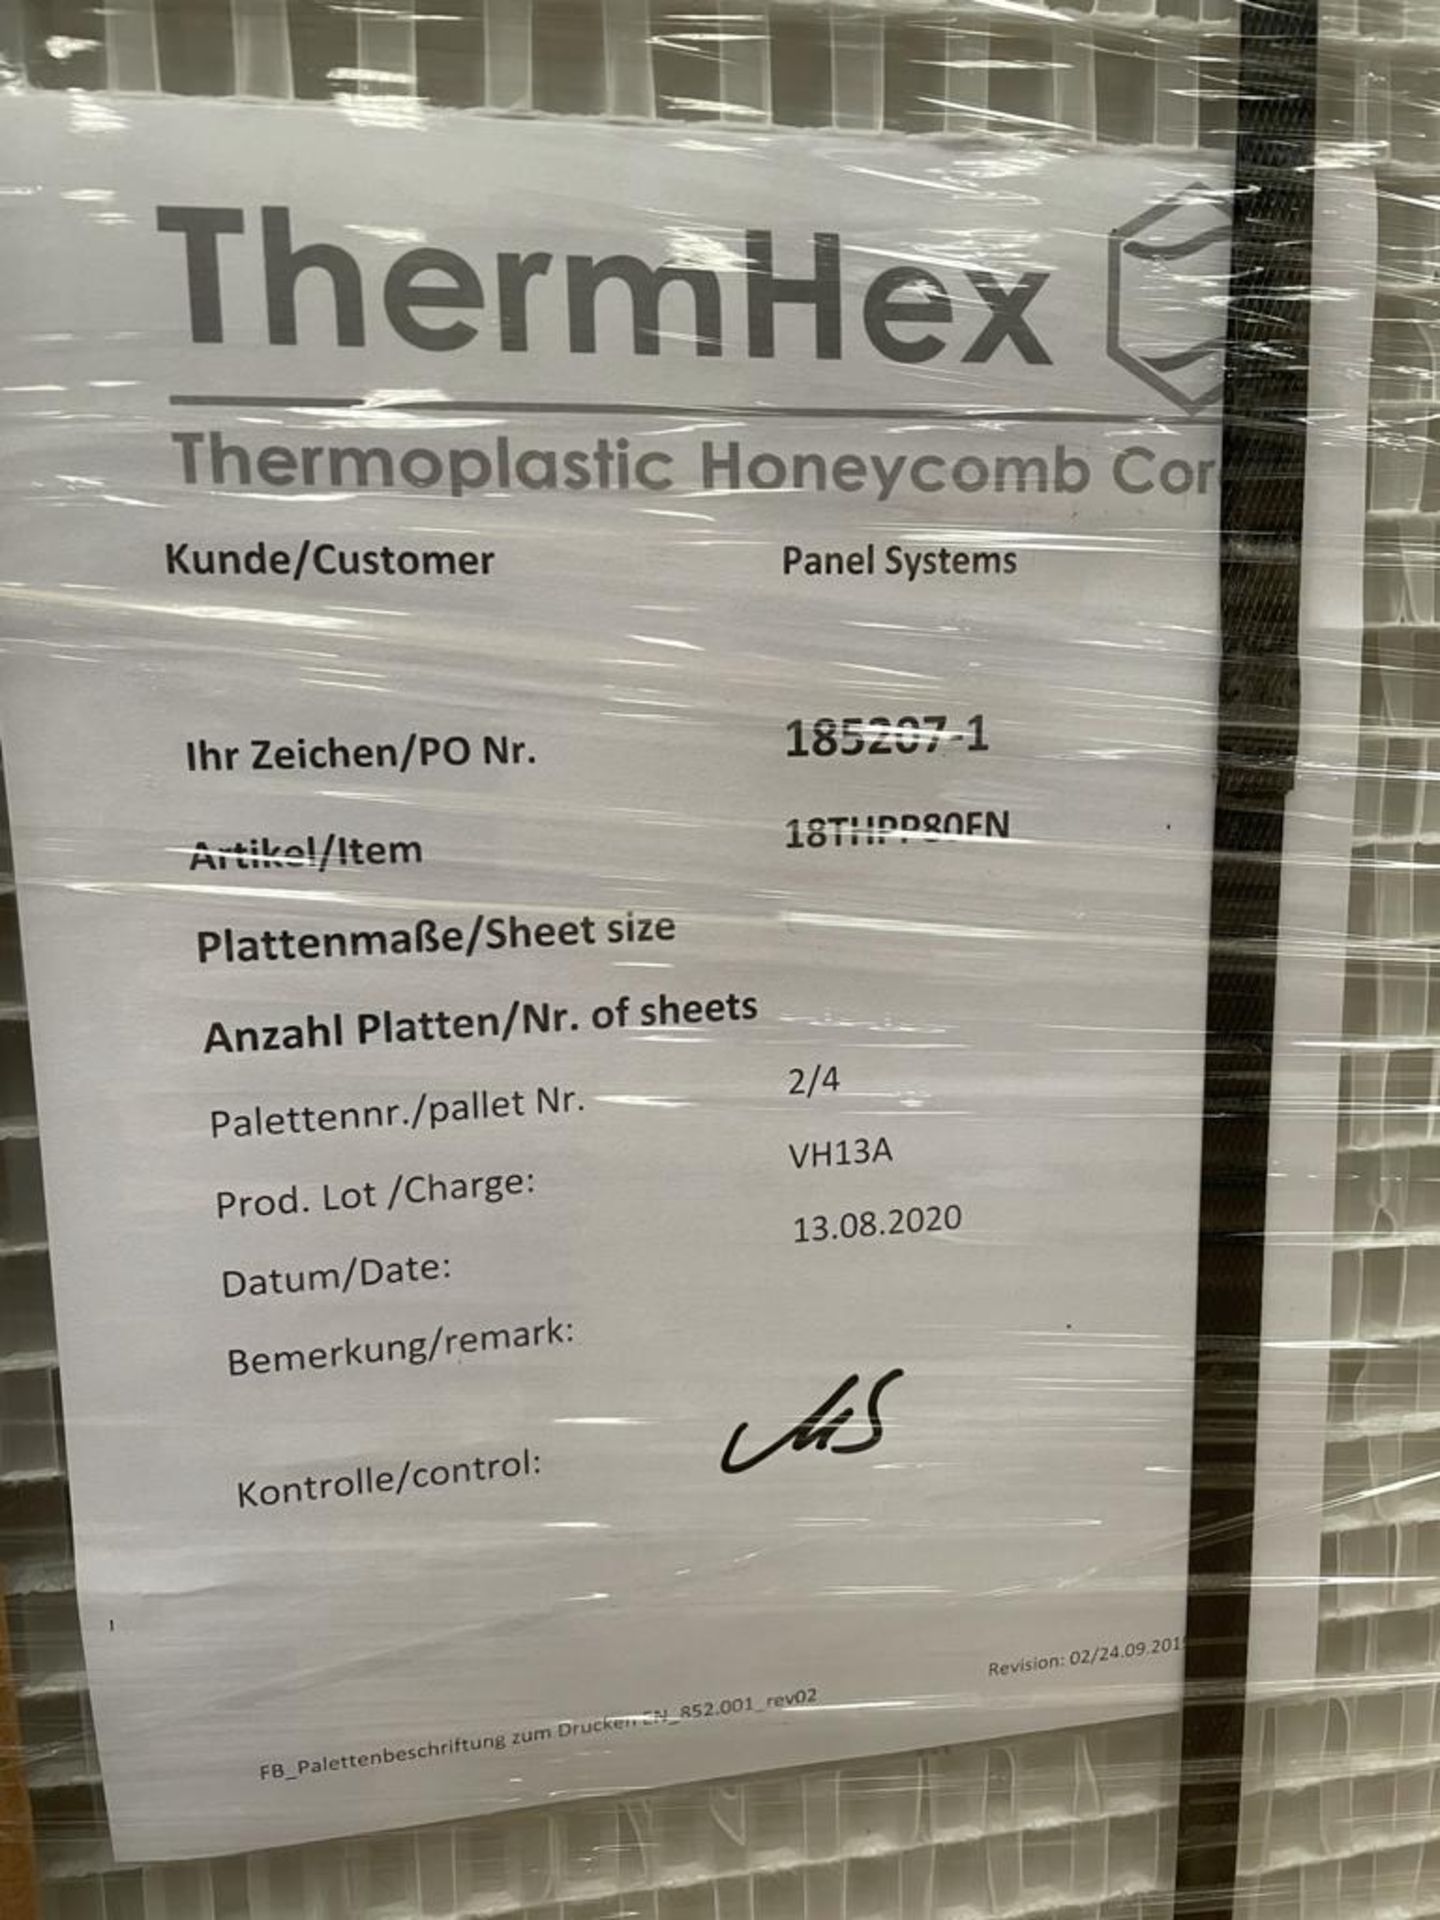 50 x ThermHex Thermoplastic Honeycomb Core Panels - Size 693 x 1210 x 18mm - New Stock - Lightweight - Image 2 of 8